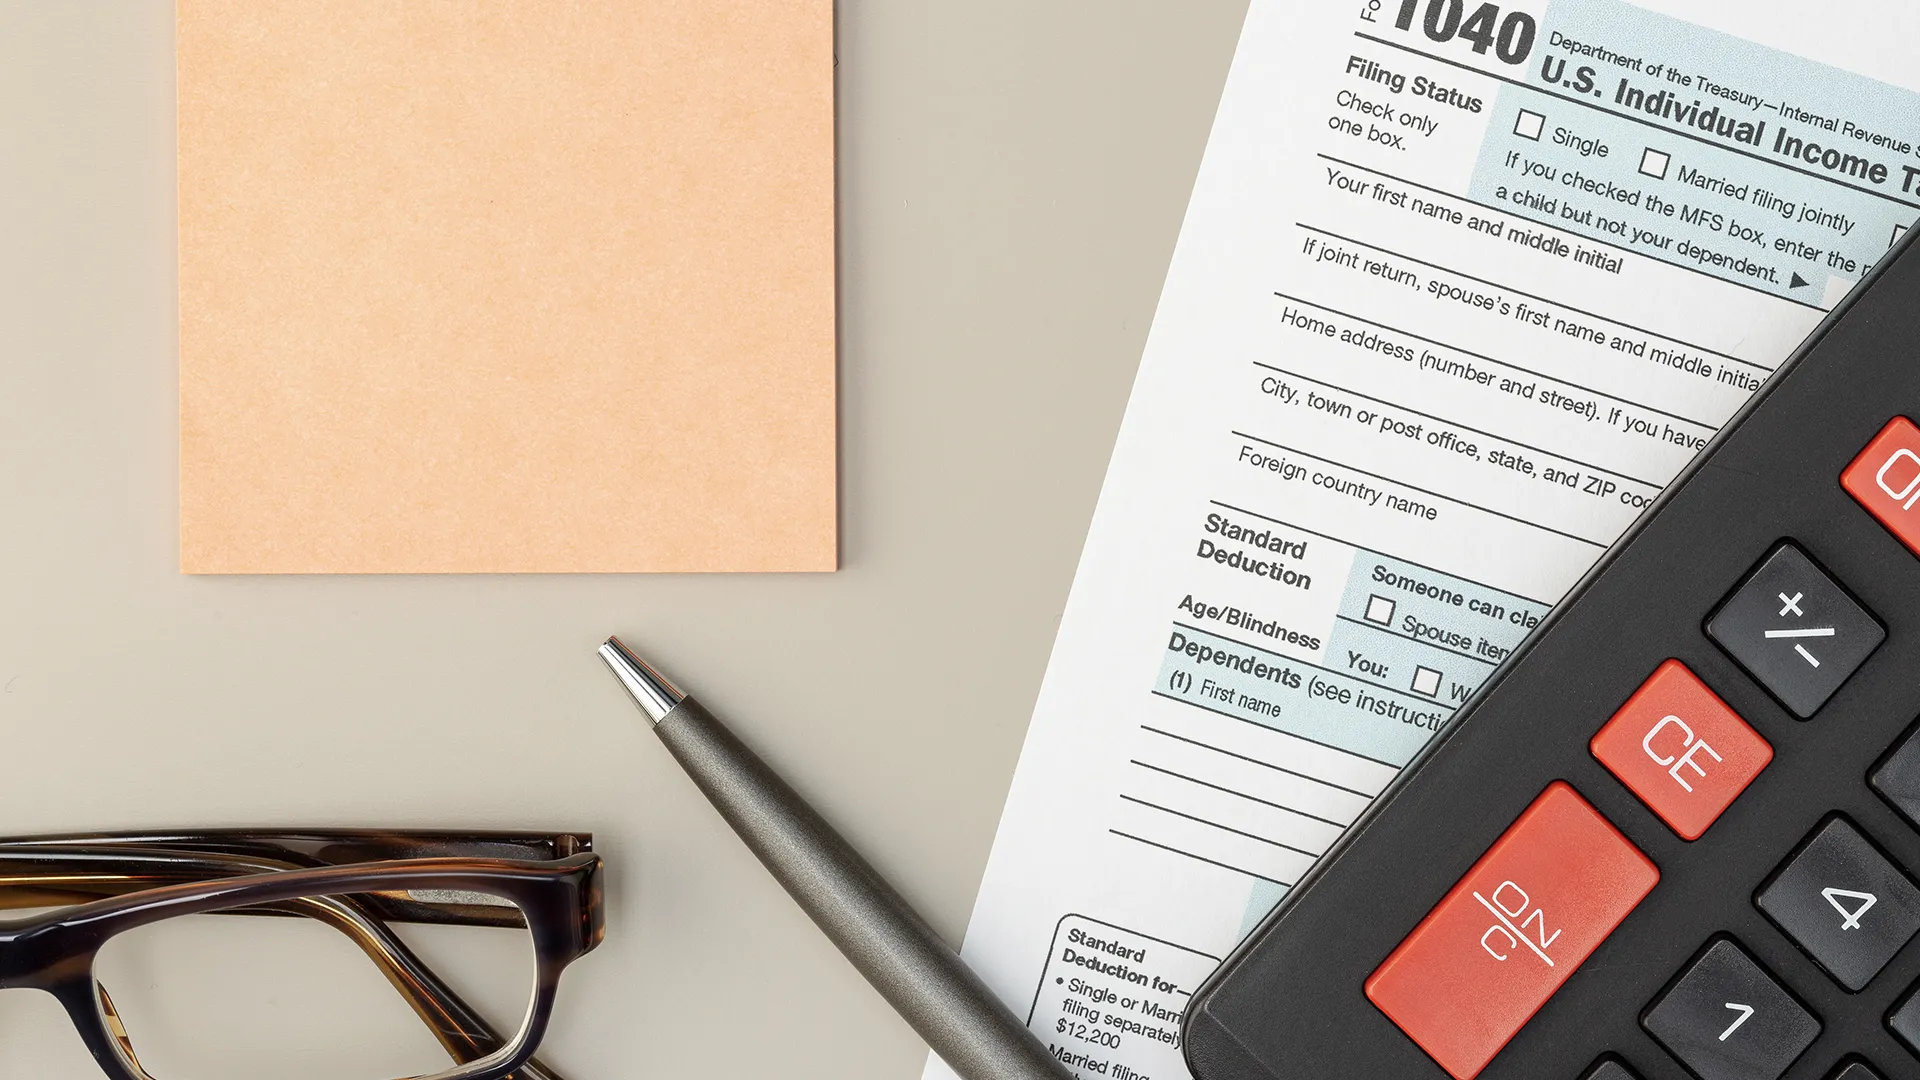 IRS encourages employers to electronically file payroll tax returns